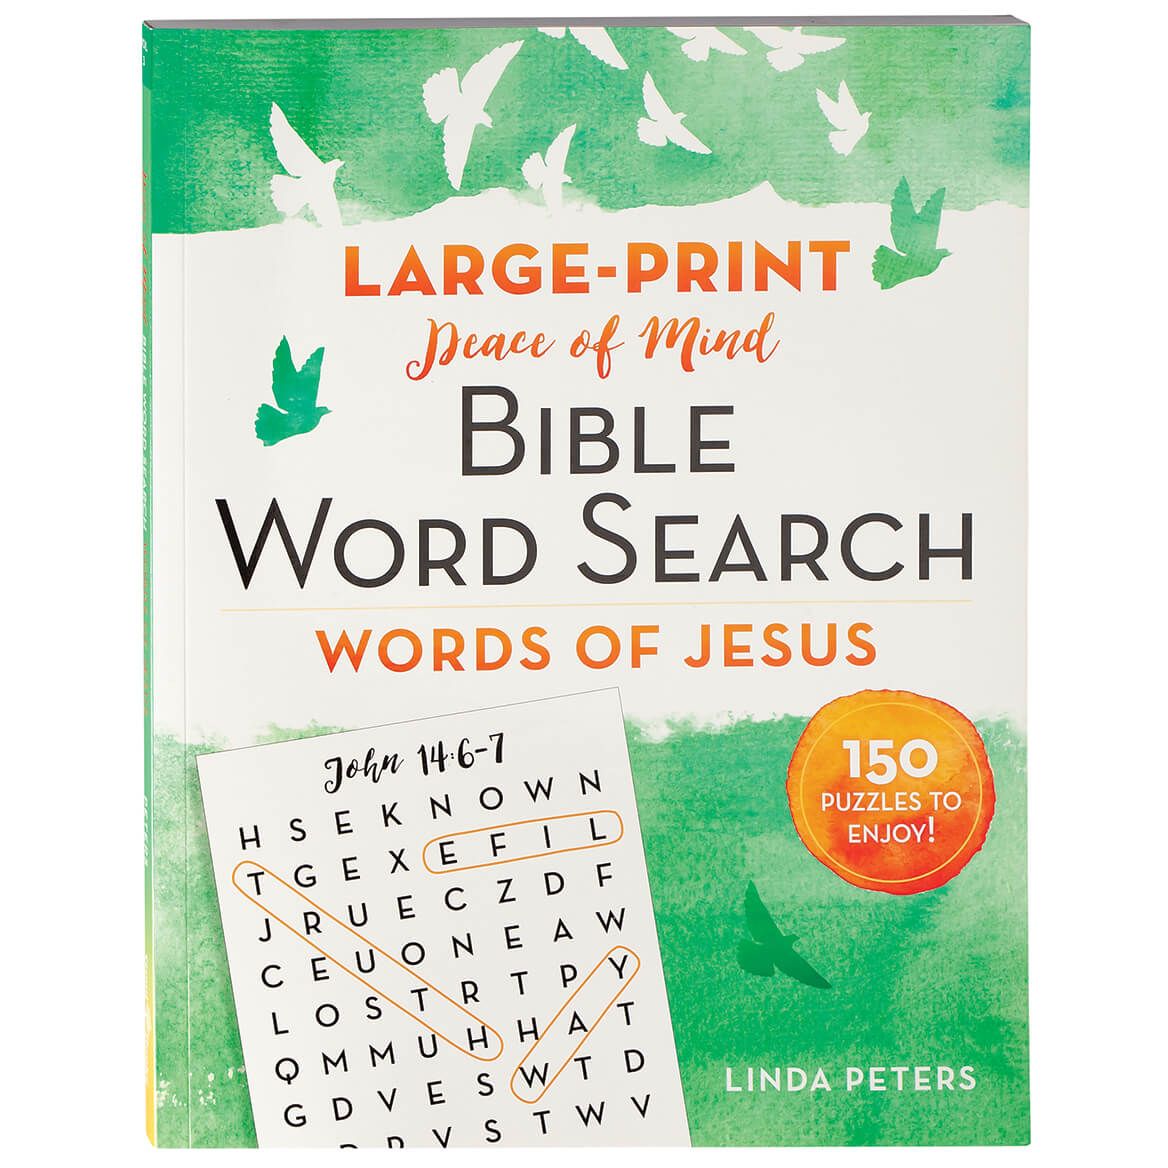 Peace of Mind Bible Word Search: Words of Jesus + '-' + 371698